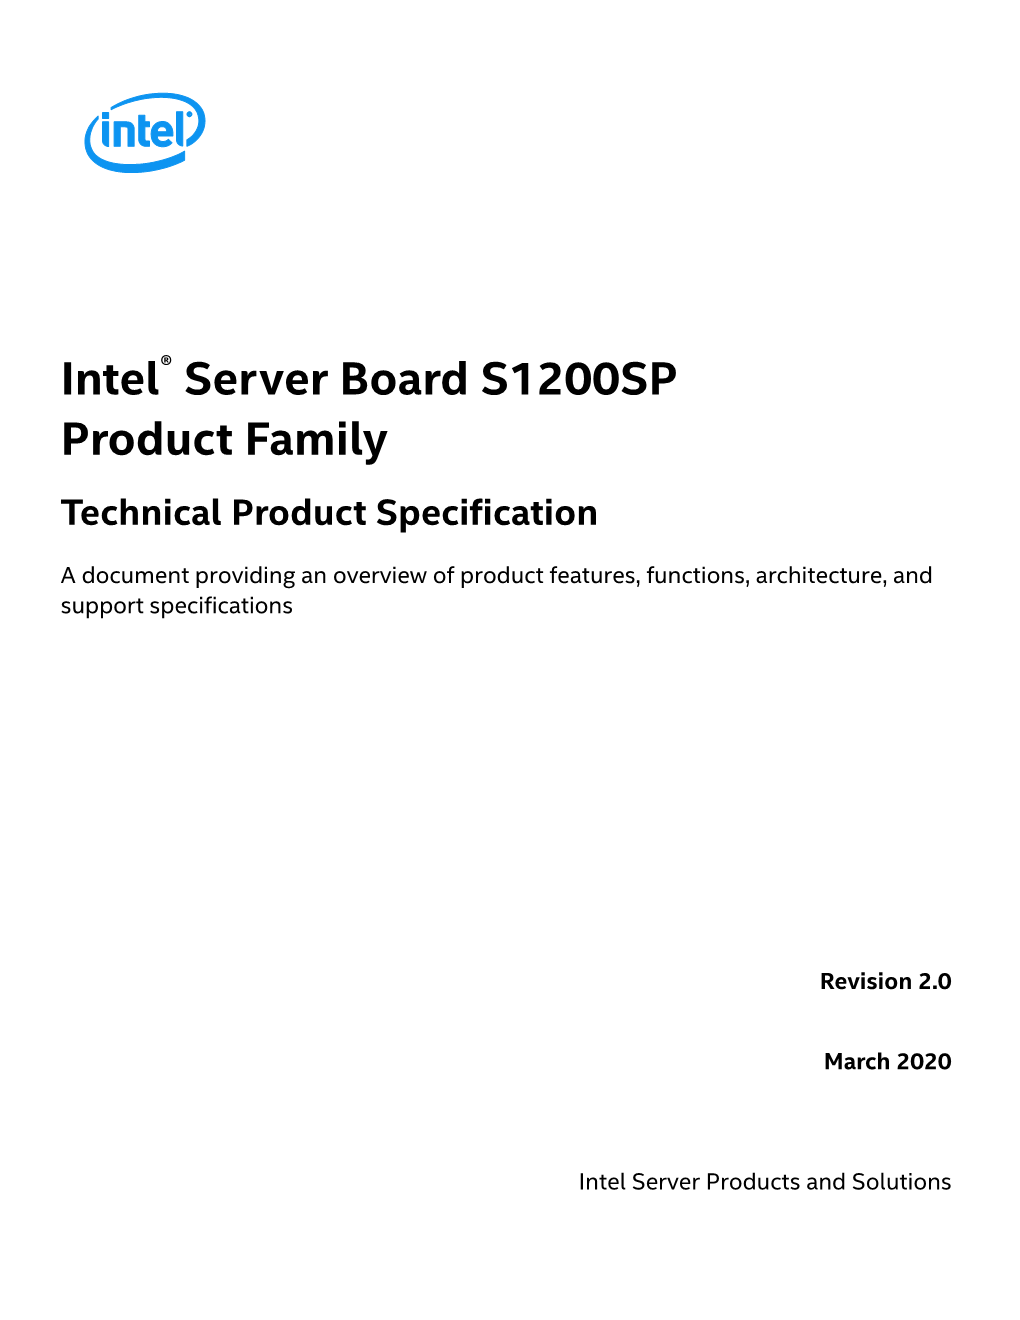 Technical Product Specification for Intel® Server Board S1200SP Family